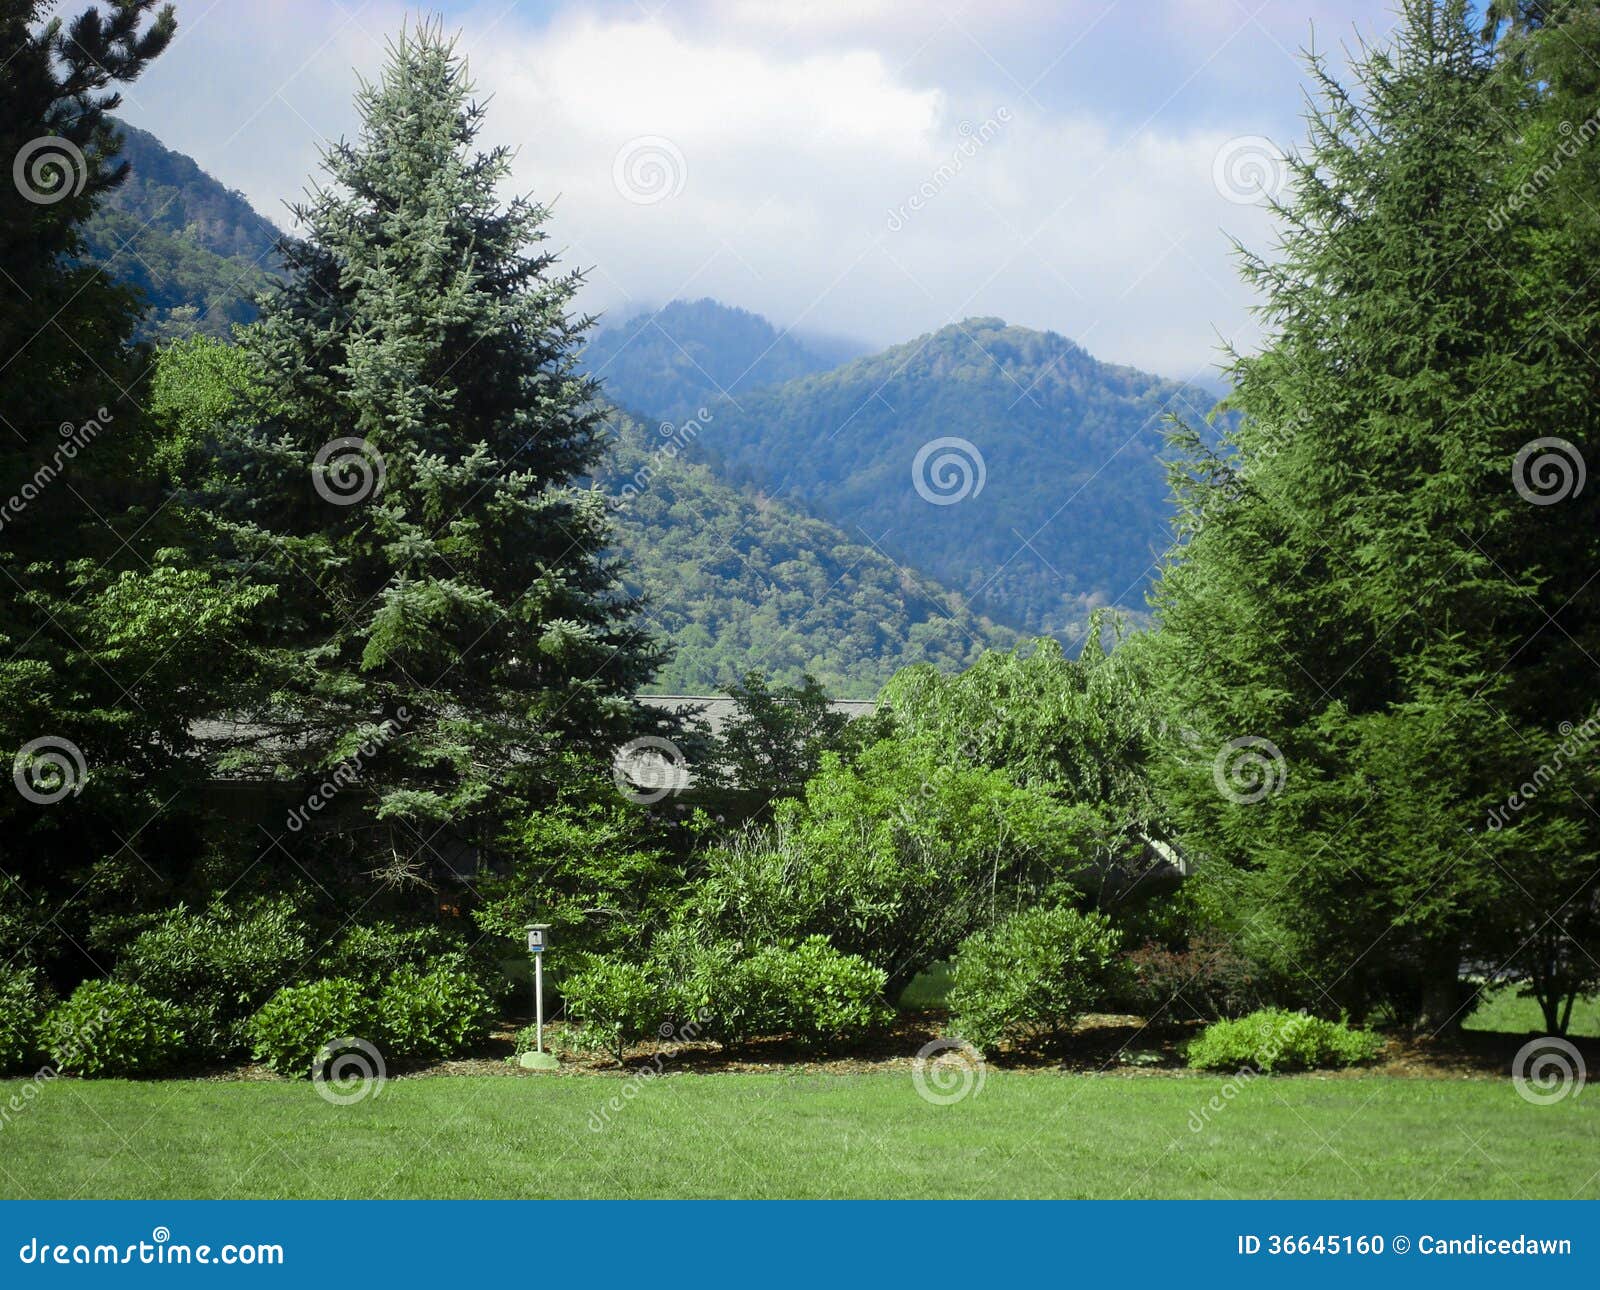 Mountain Fairy Tale stock photo. Image of trees, forest - 36645160